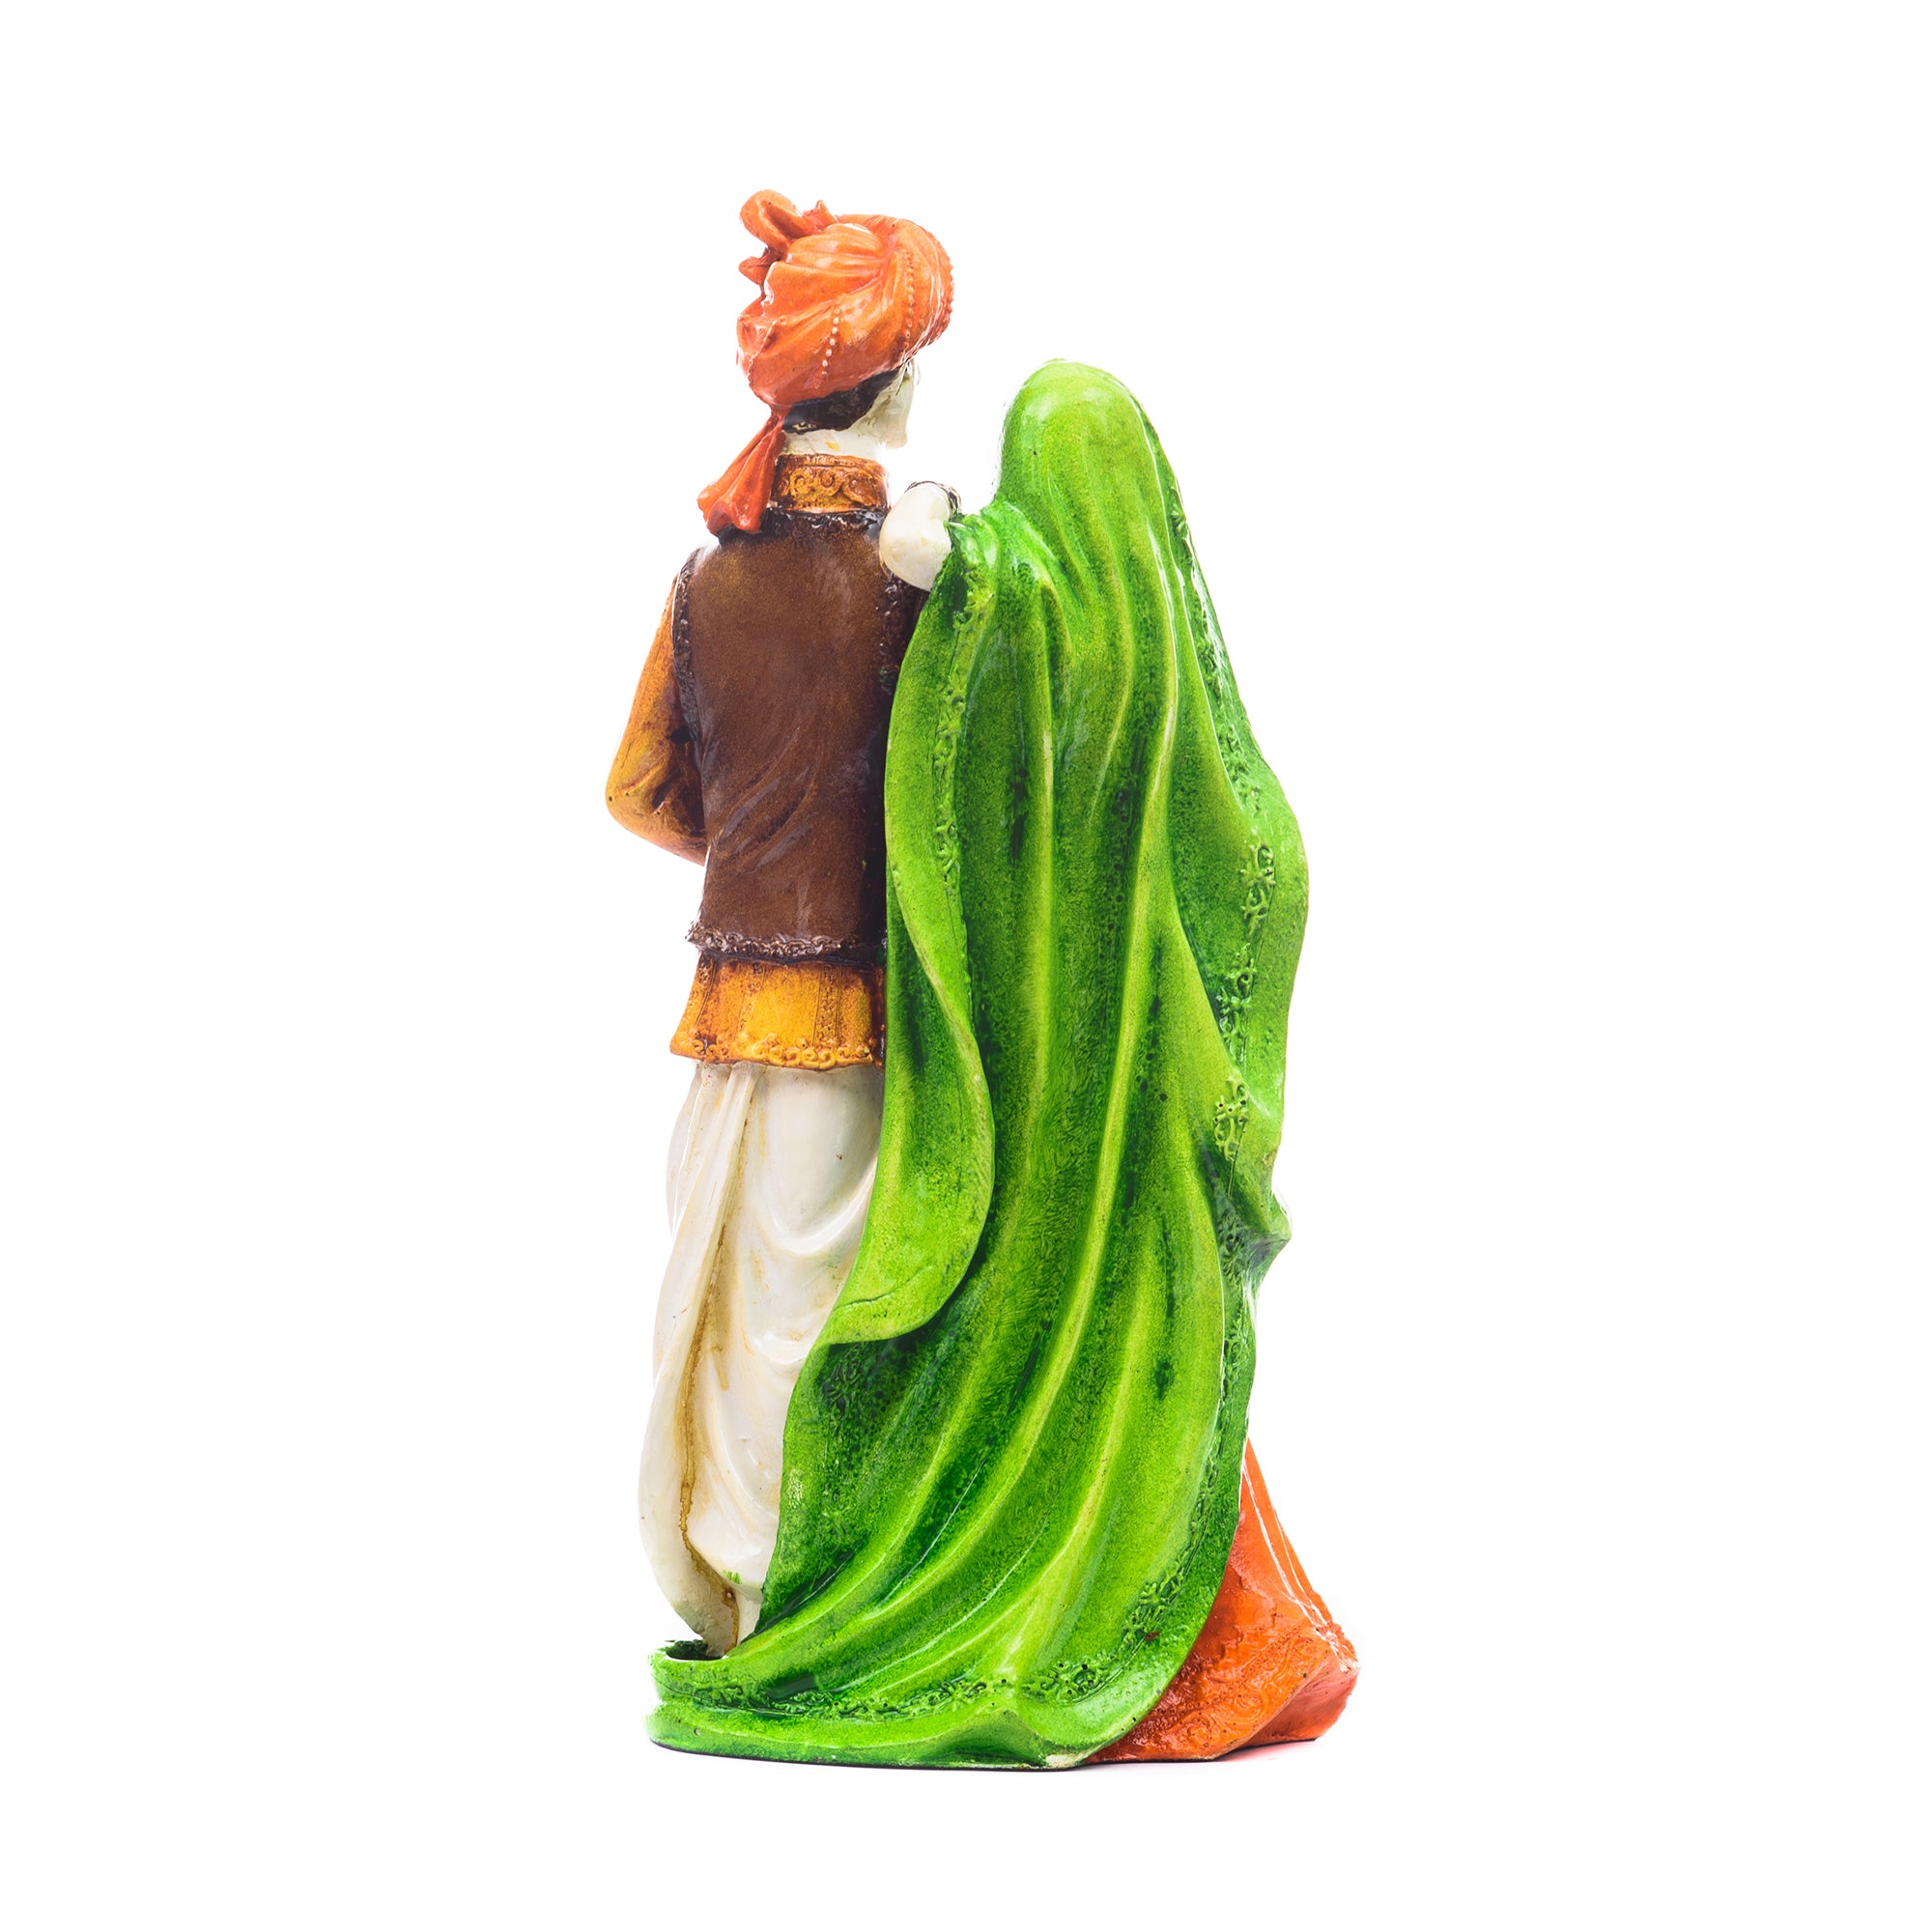 Polyresin Rajasthani Man And Women Statue Handcrafted Human Figurines Decorative Showpiece 3